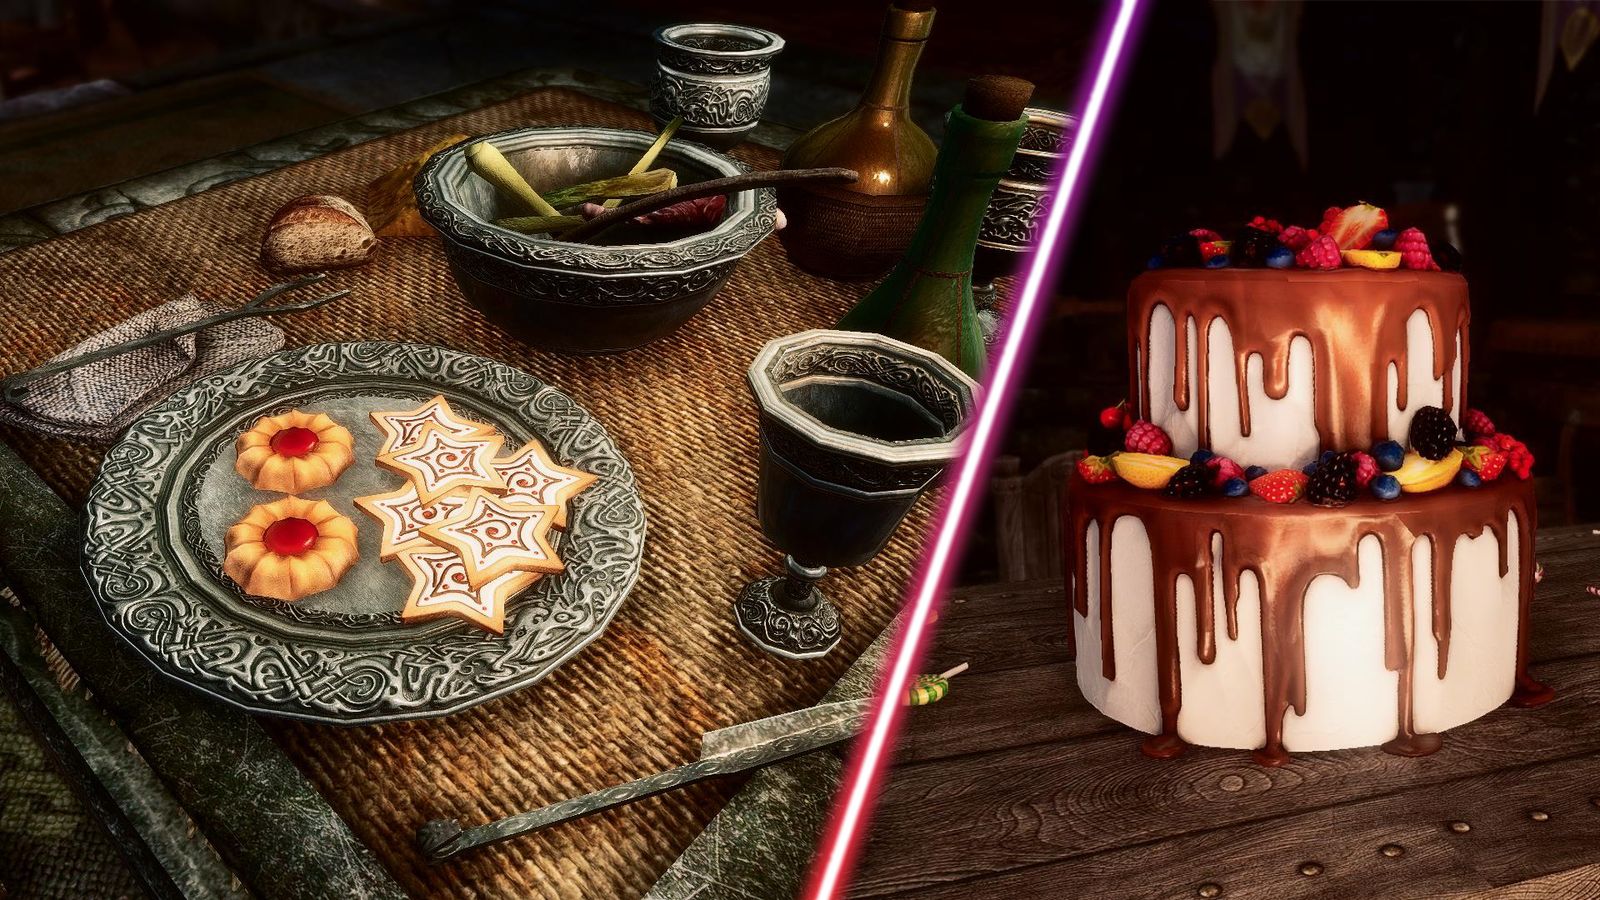 Some delicious cakes and sweets in Skyrim.